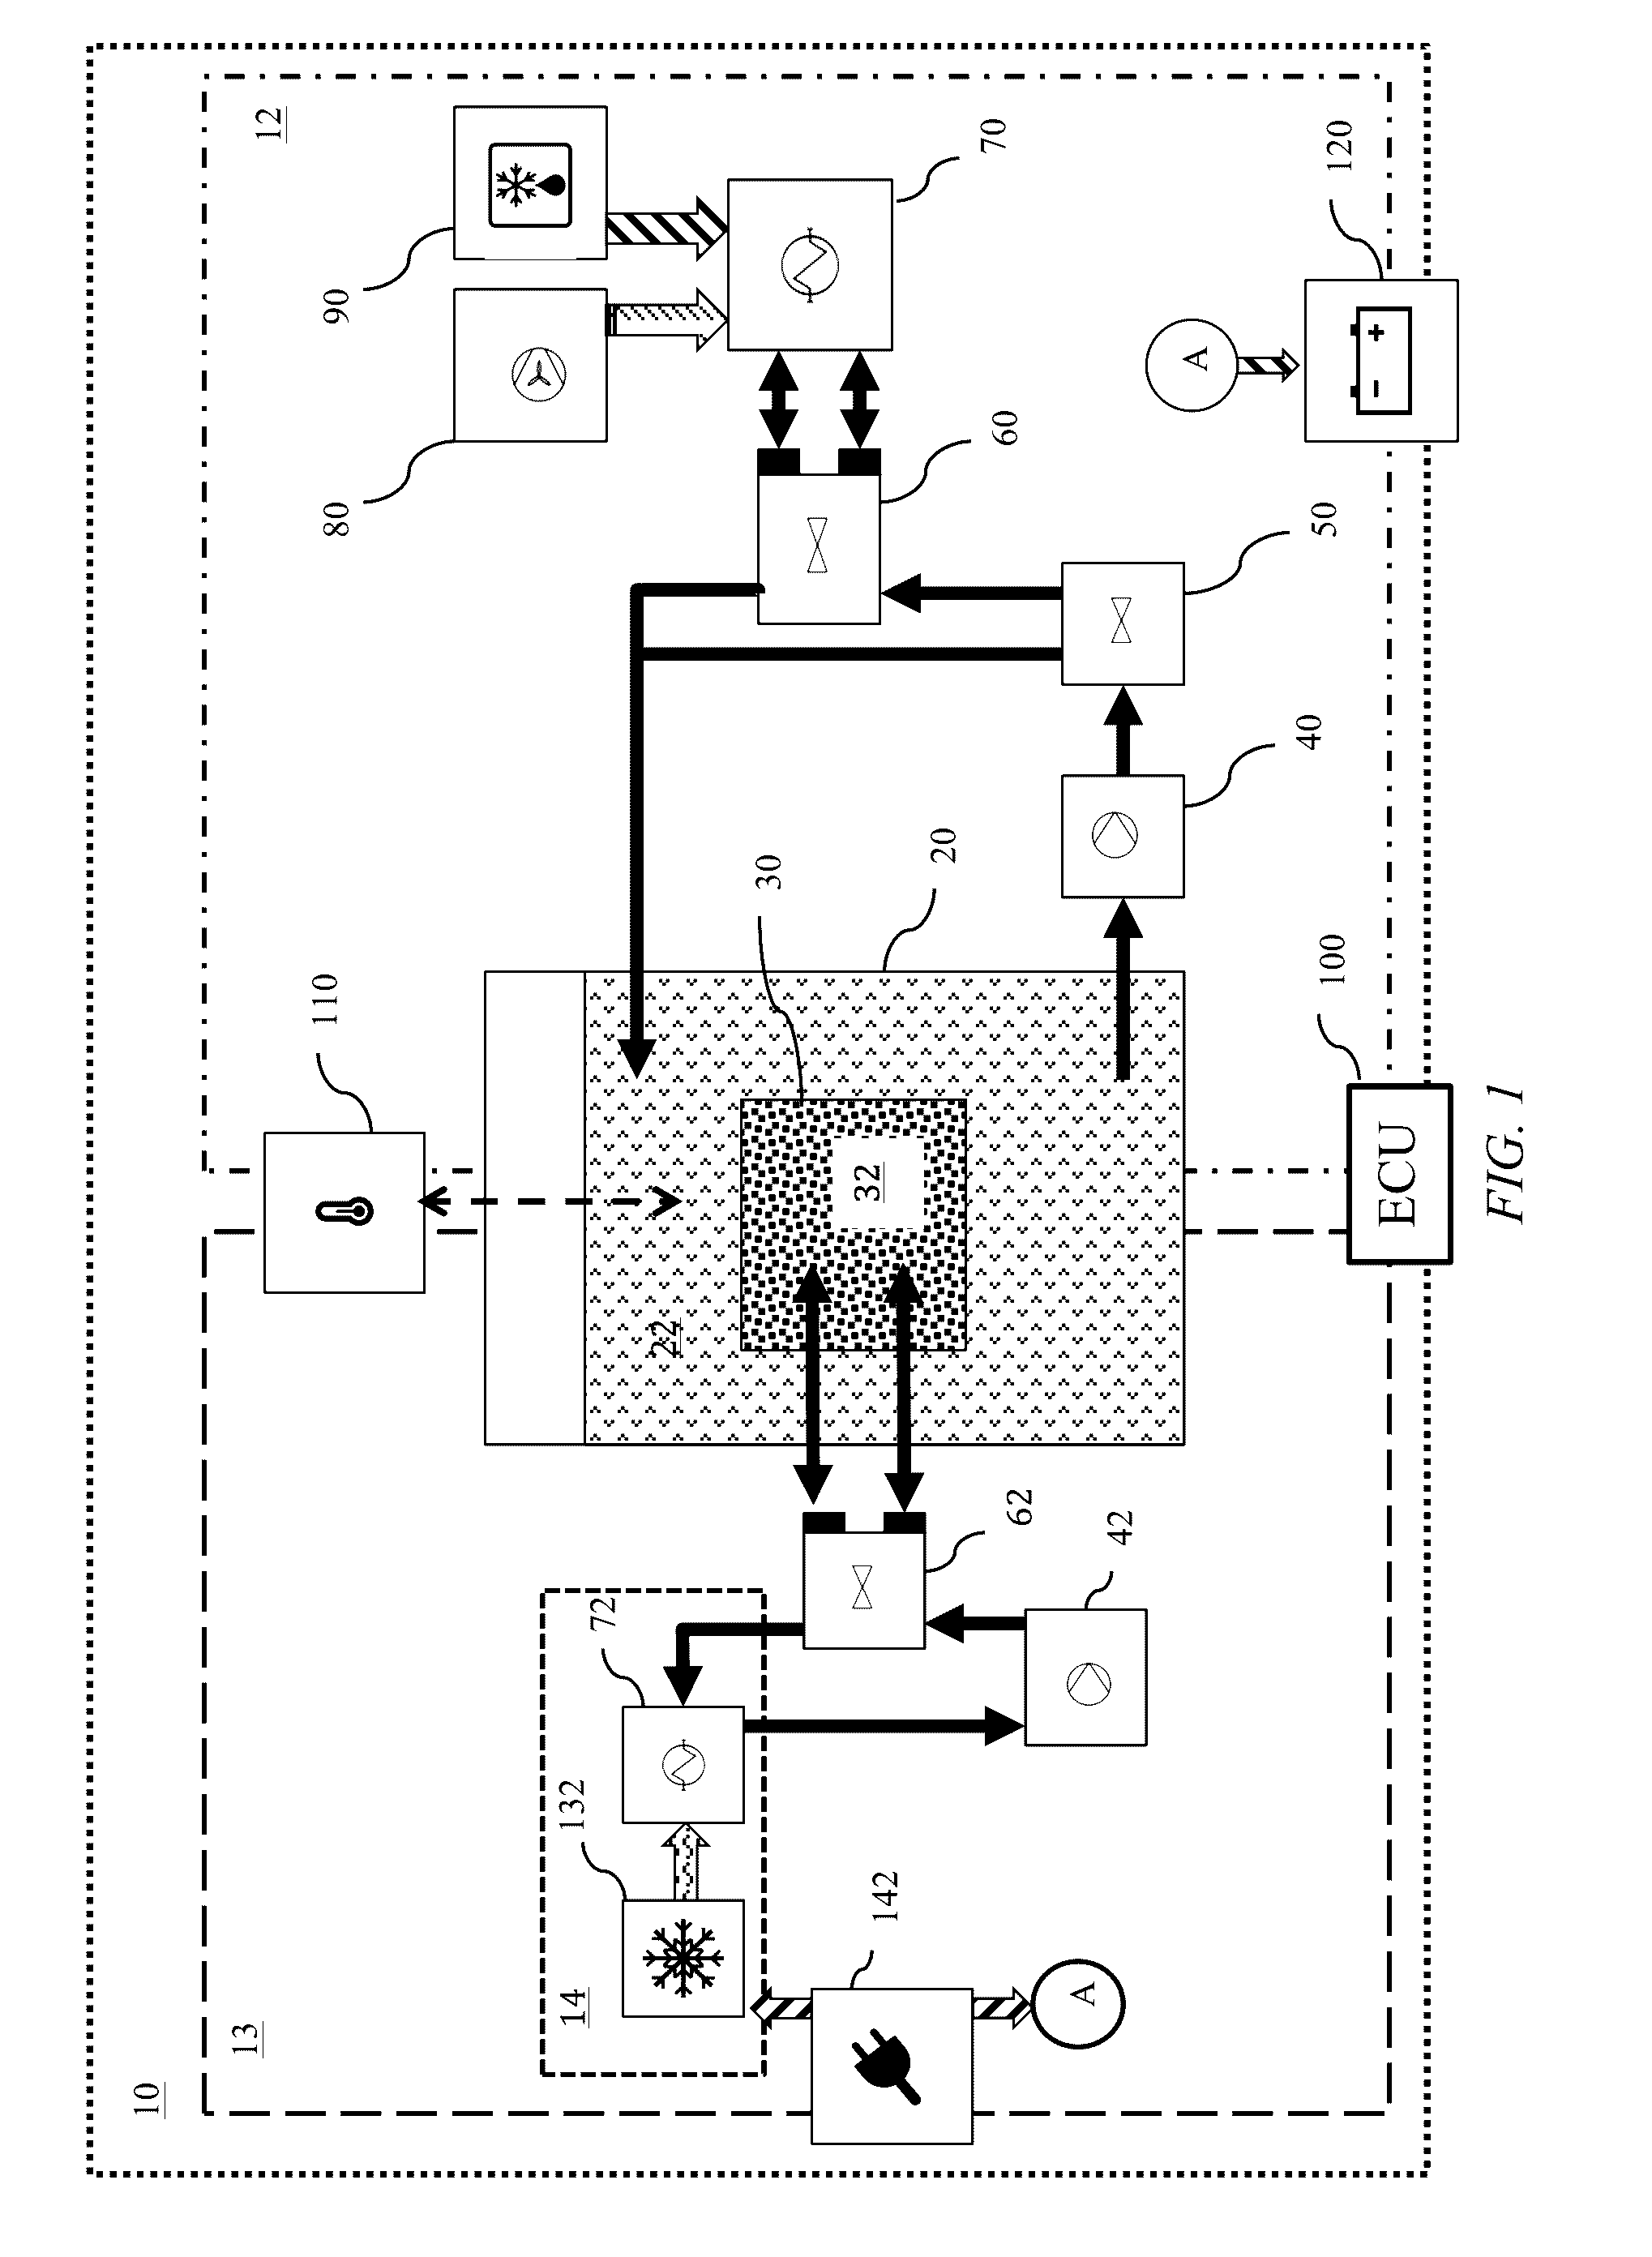 Transportation Refrigeration System with Integrated Power Generation and Energy Storage